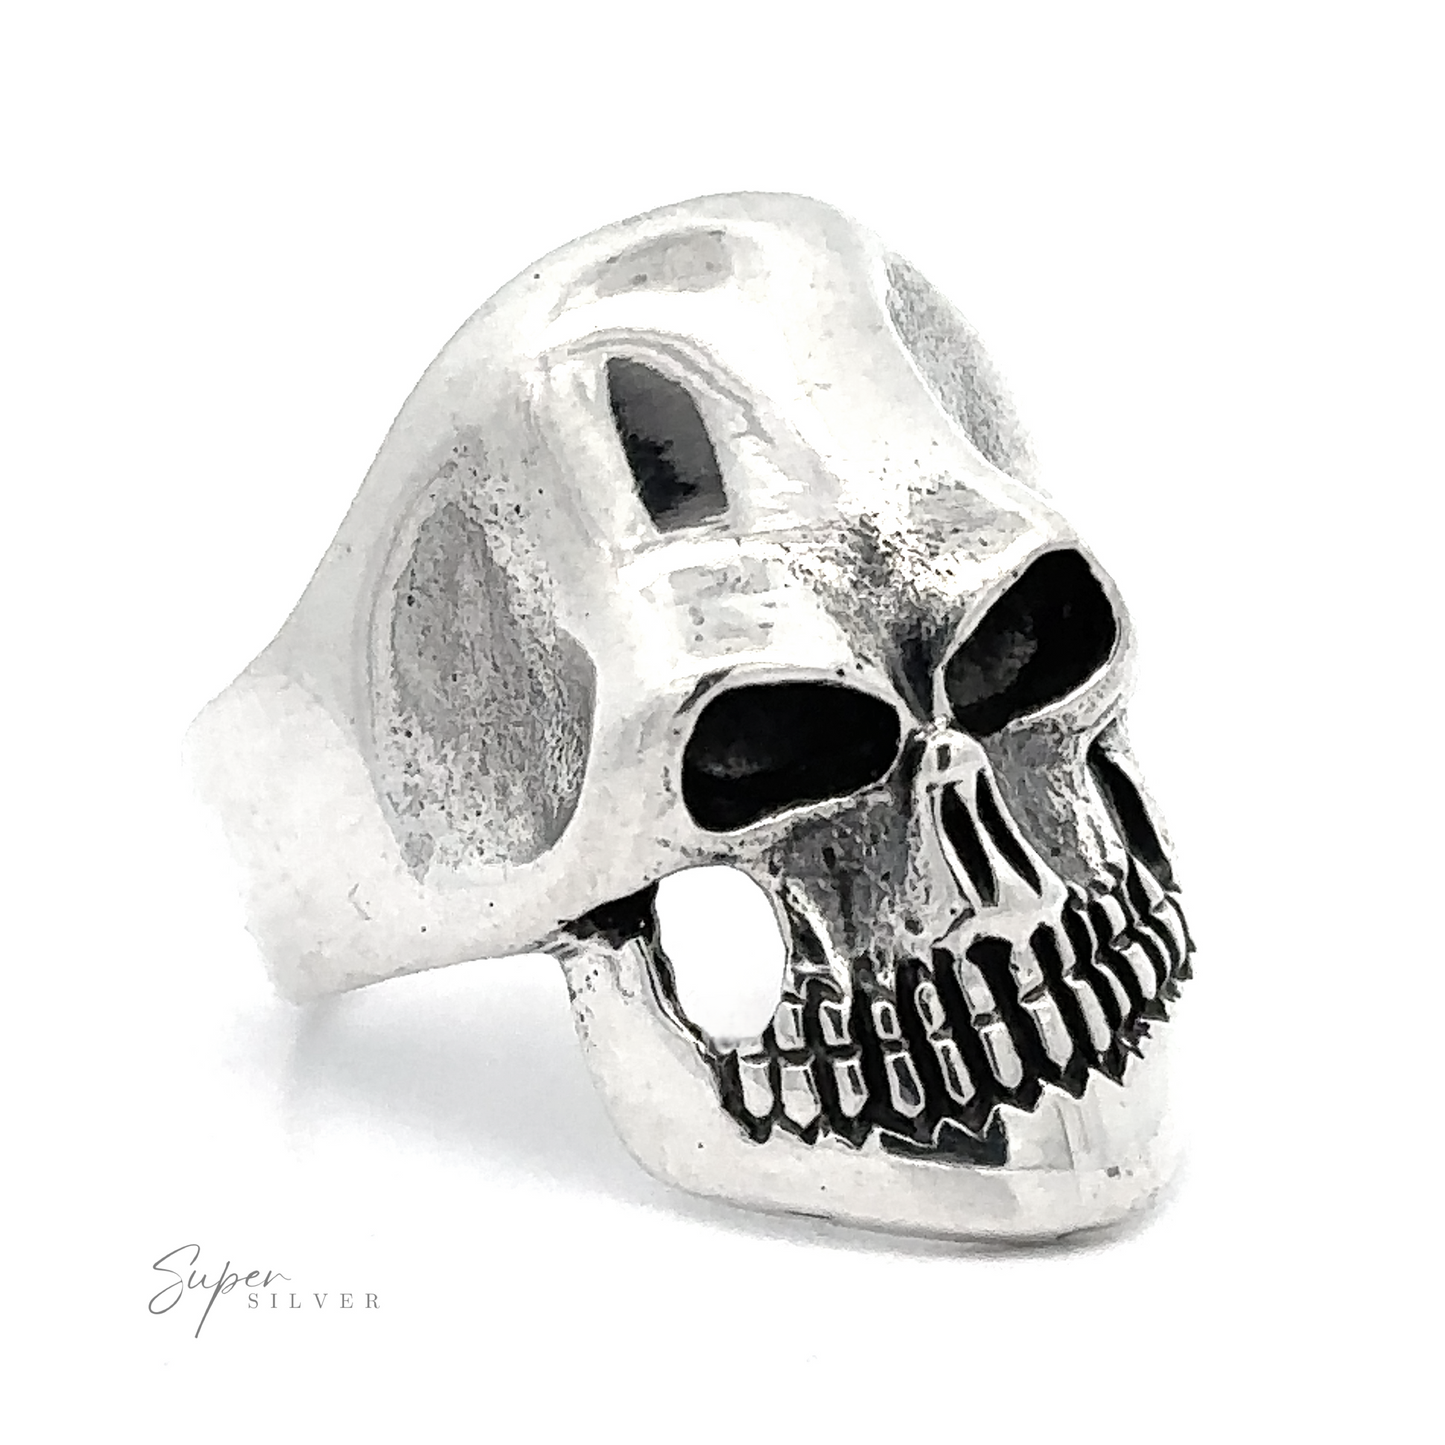 A Silver Skull Statement Ring, crafted in .925 sterling silver, featuring a detailed skull design with hollow eye sockets and visible teeth exudes edgy elegance. The brand name "Super Silver" is seen at the lower left, set against a white background.